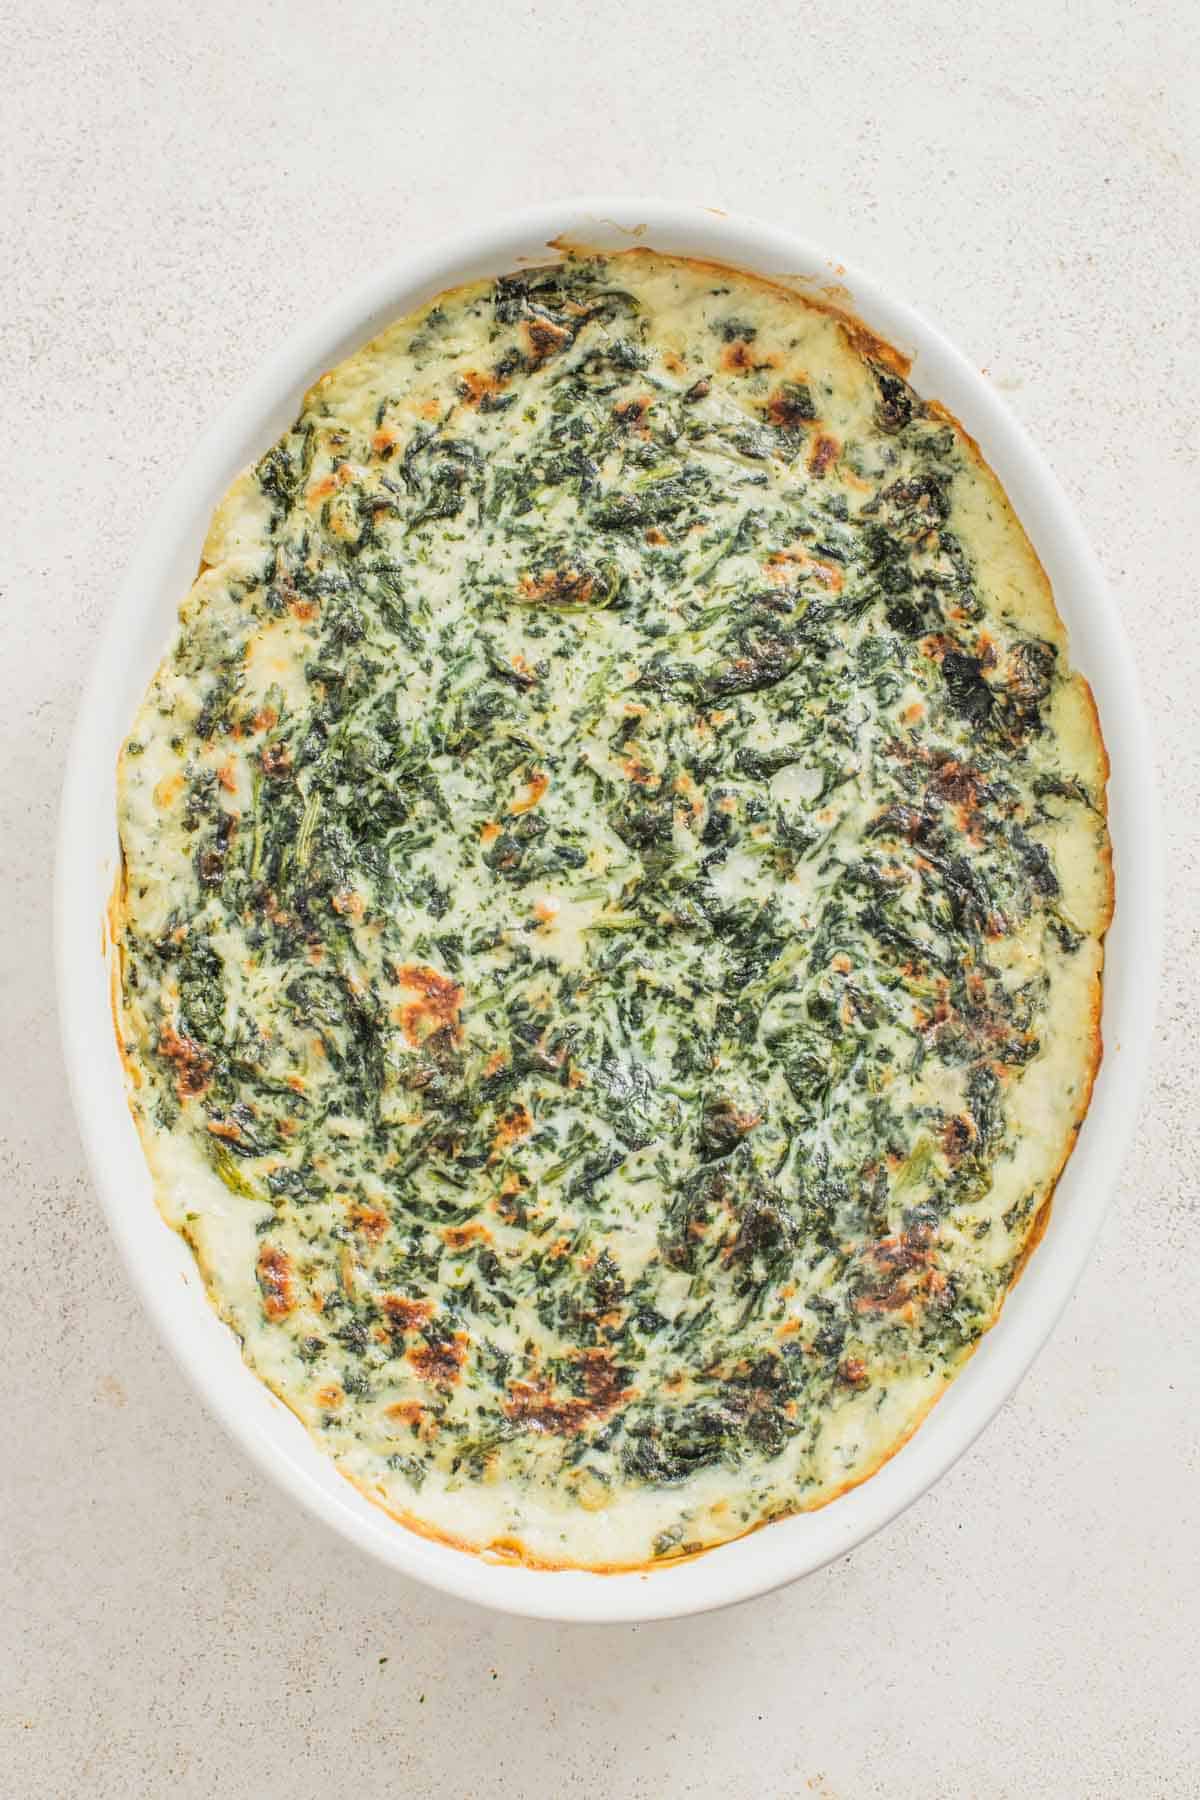 A baked spinach casserole dish.